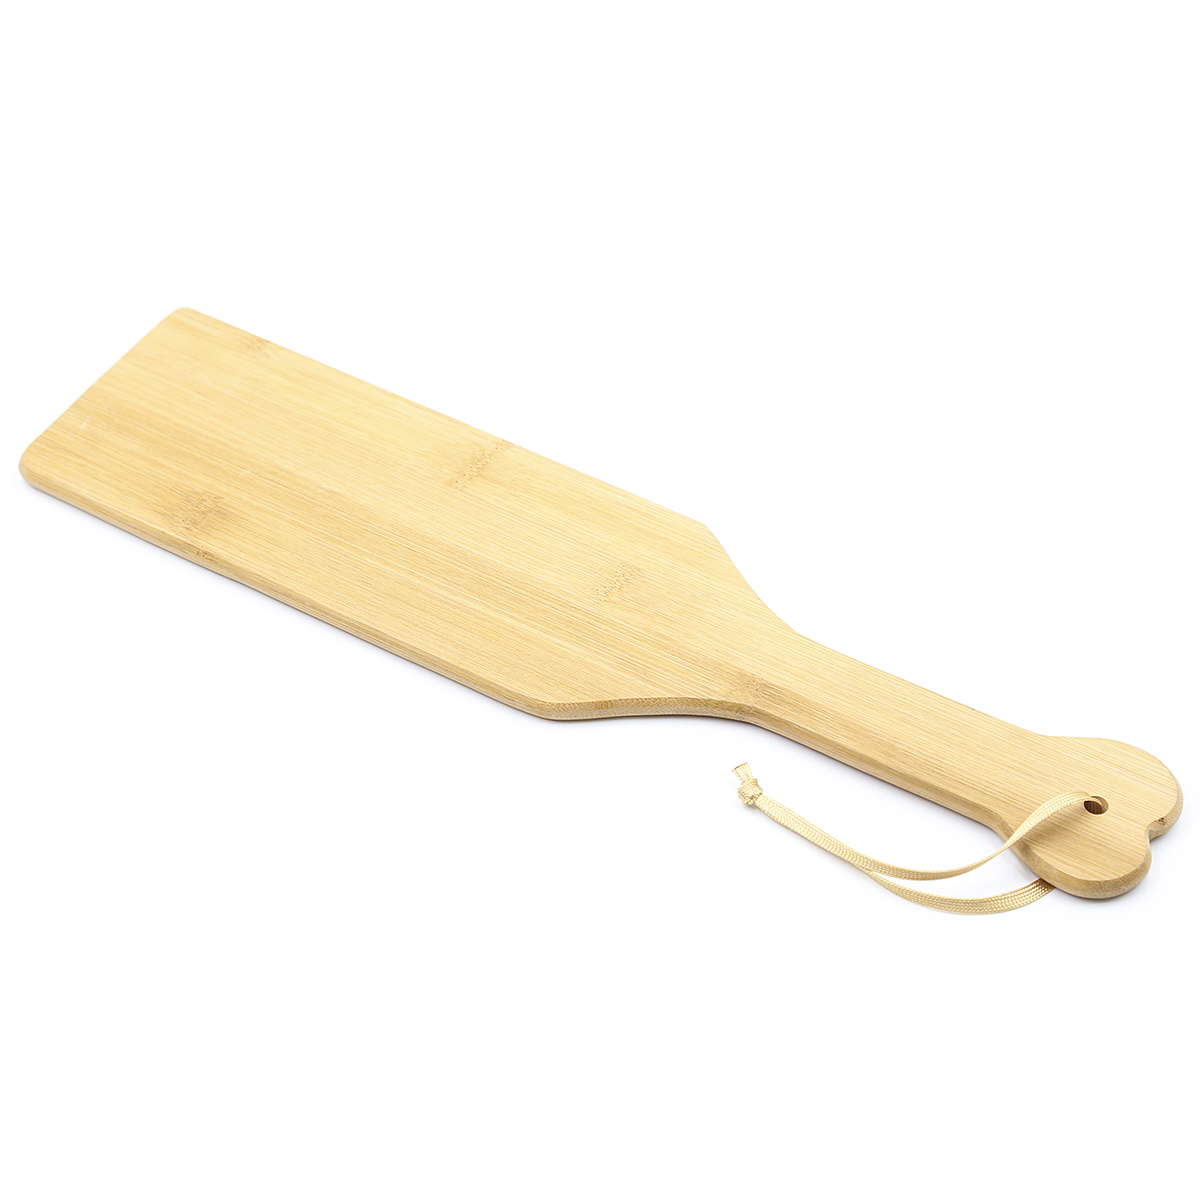 Bamboo-Wooden-Paddle-OPR-321038-3